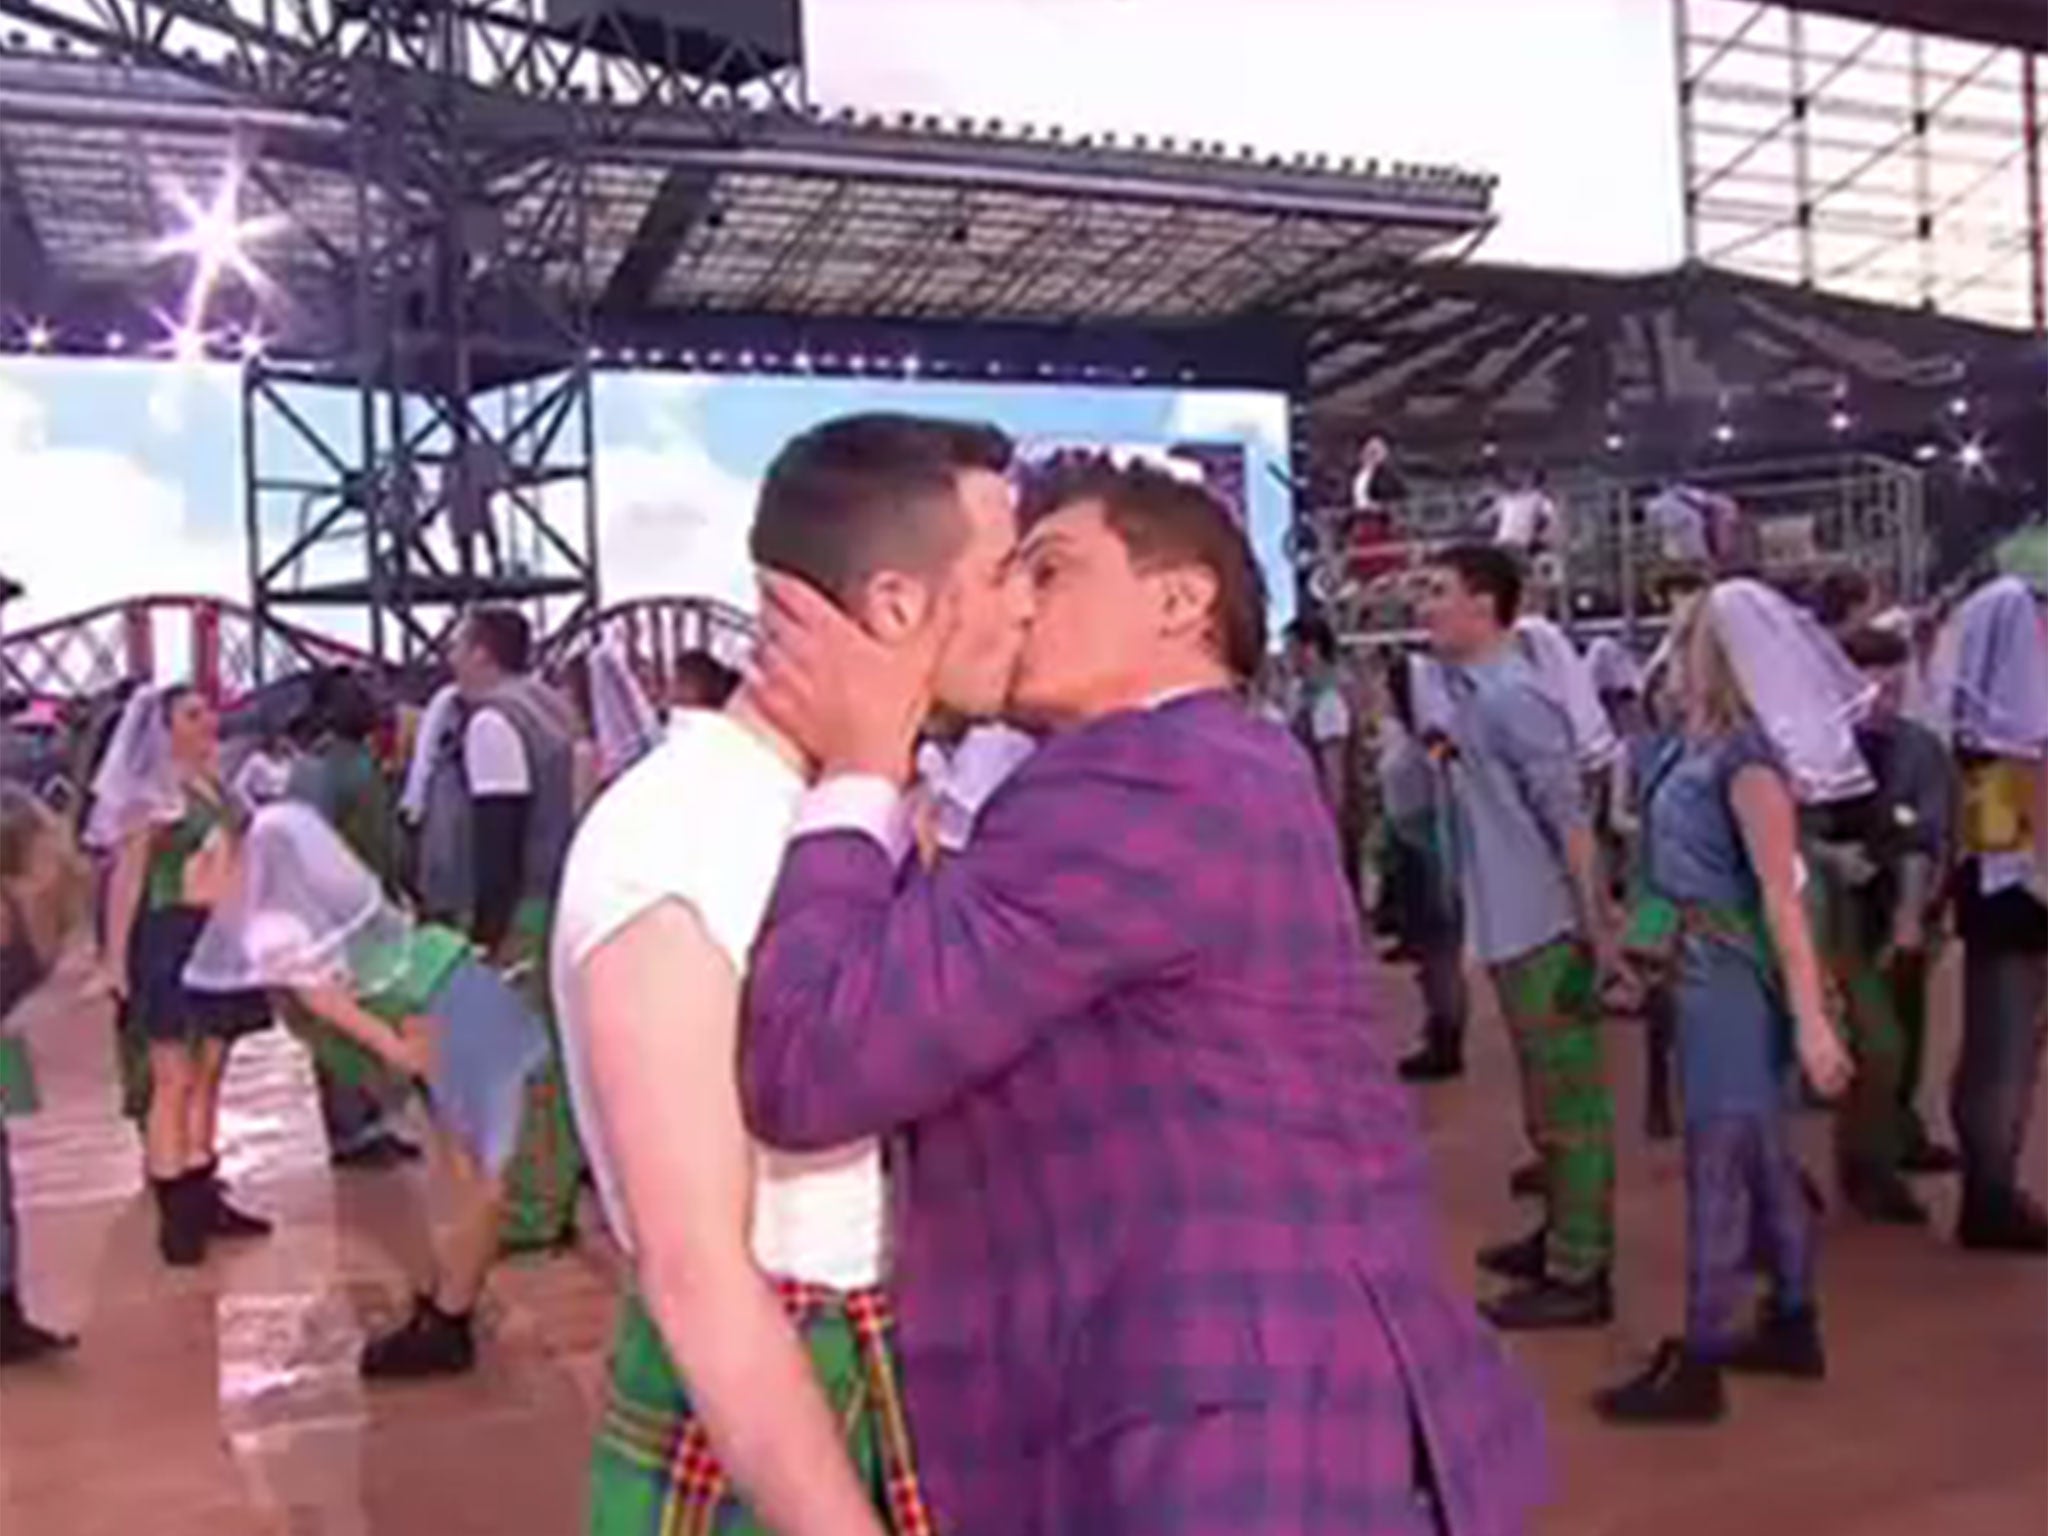 John Barrowman kisses his male “bride” at a mock Gretna Green during the Commonwealth Games opening ceremony 